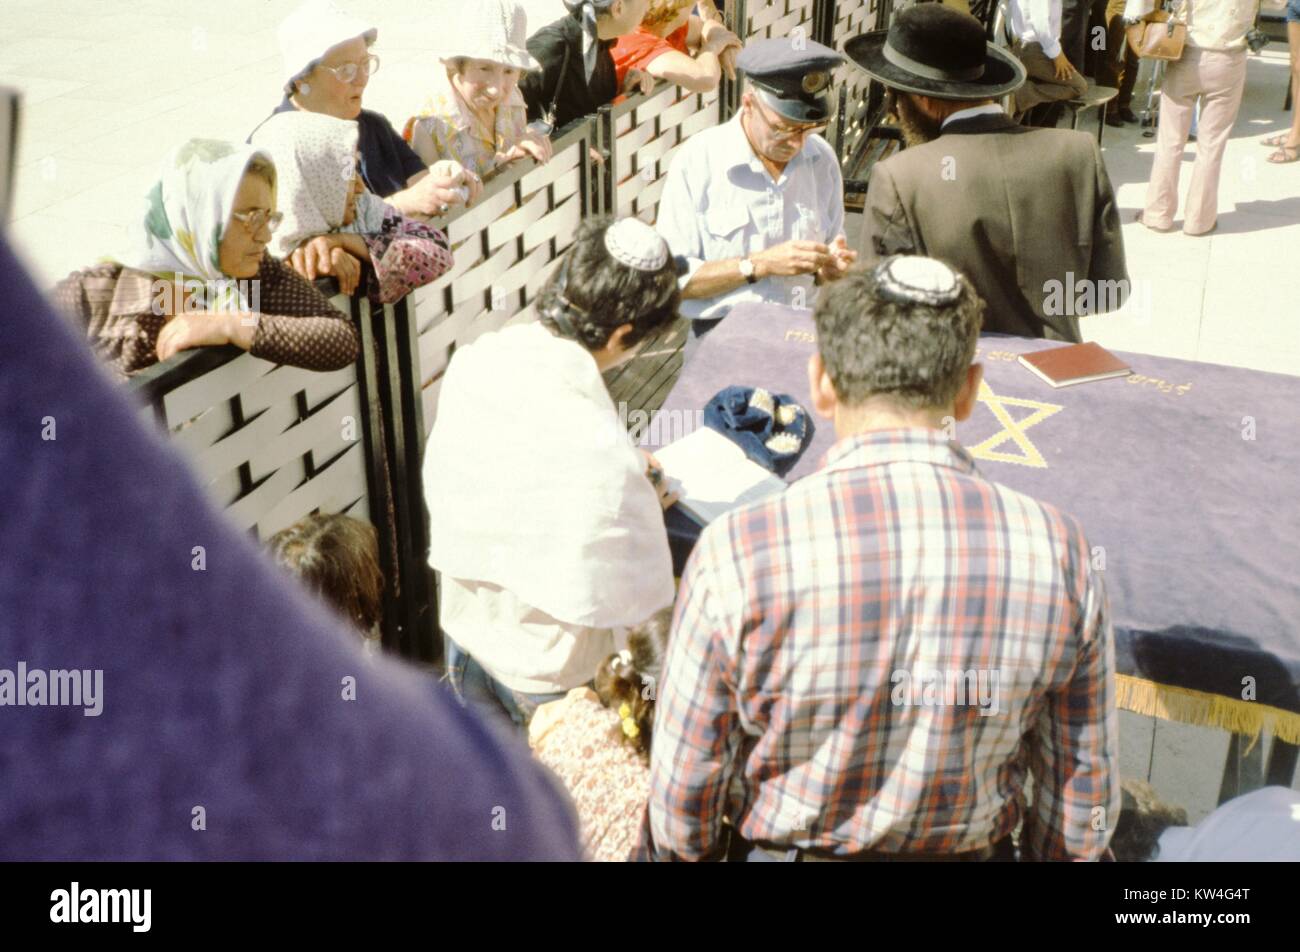 At the Western Wall (kotel) in Jerusalem, Israel, several women wearing hats and shawls peer over the divider between the male and female sections of the wall, as Jewish men wearing yarmuckles and tallit pray, 1975. Until 2016, the Western Wall was divided according to gender. Stock Photo